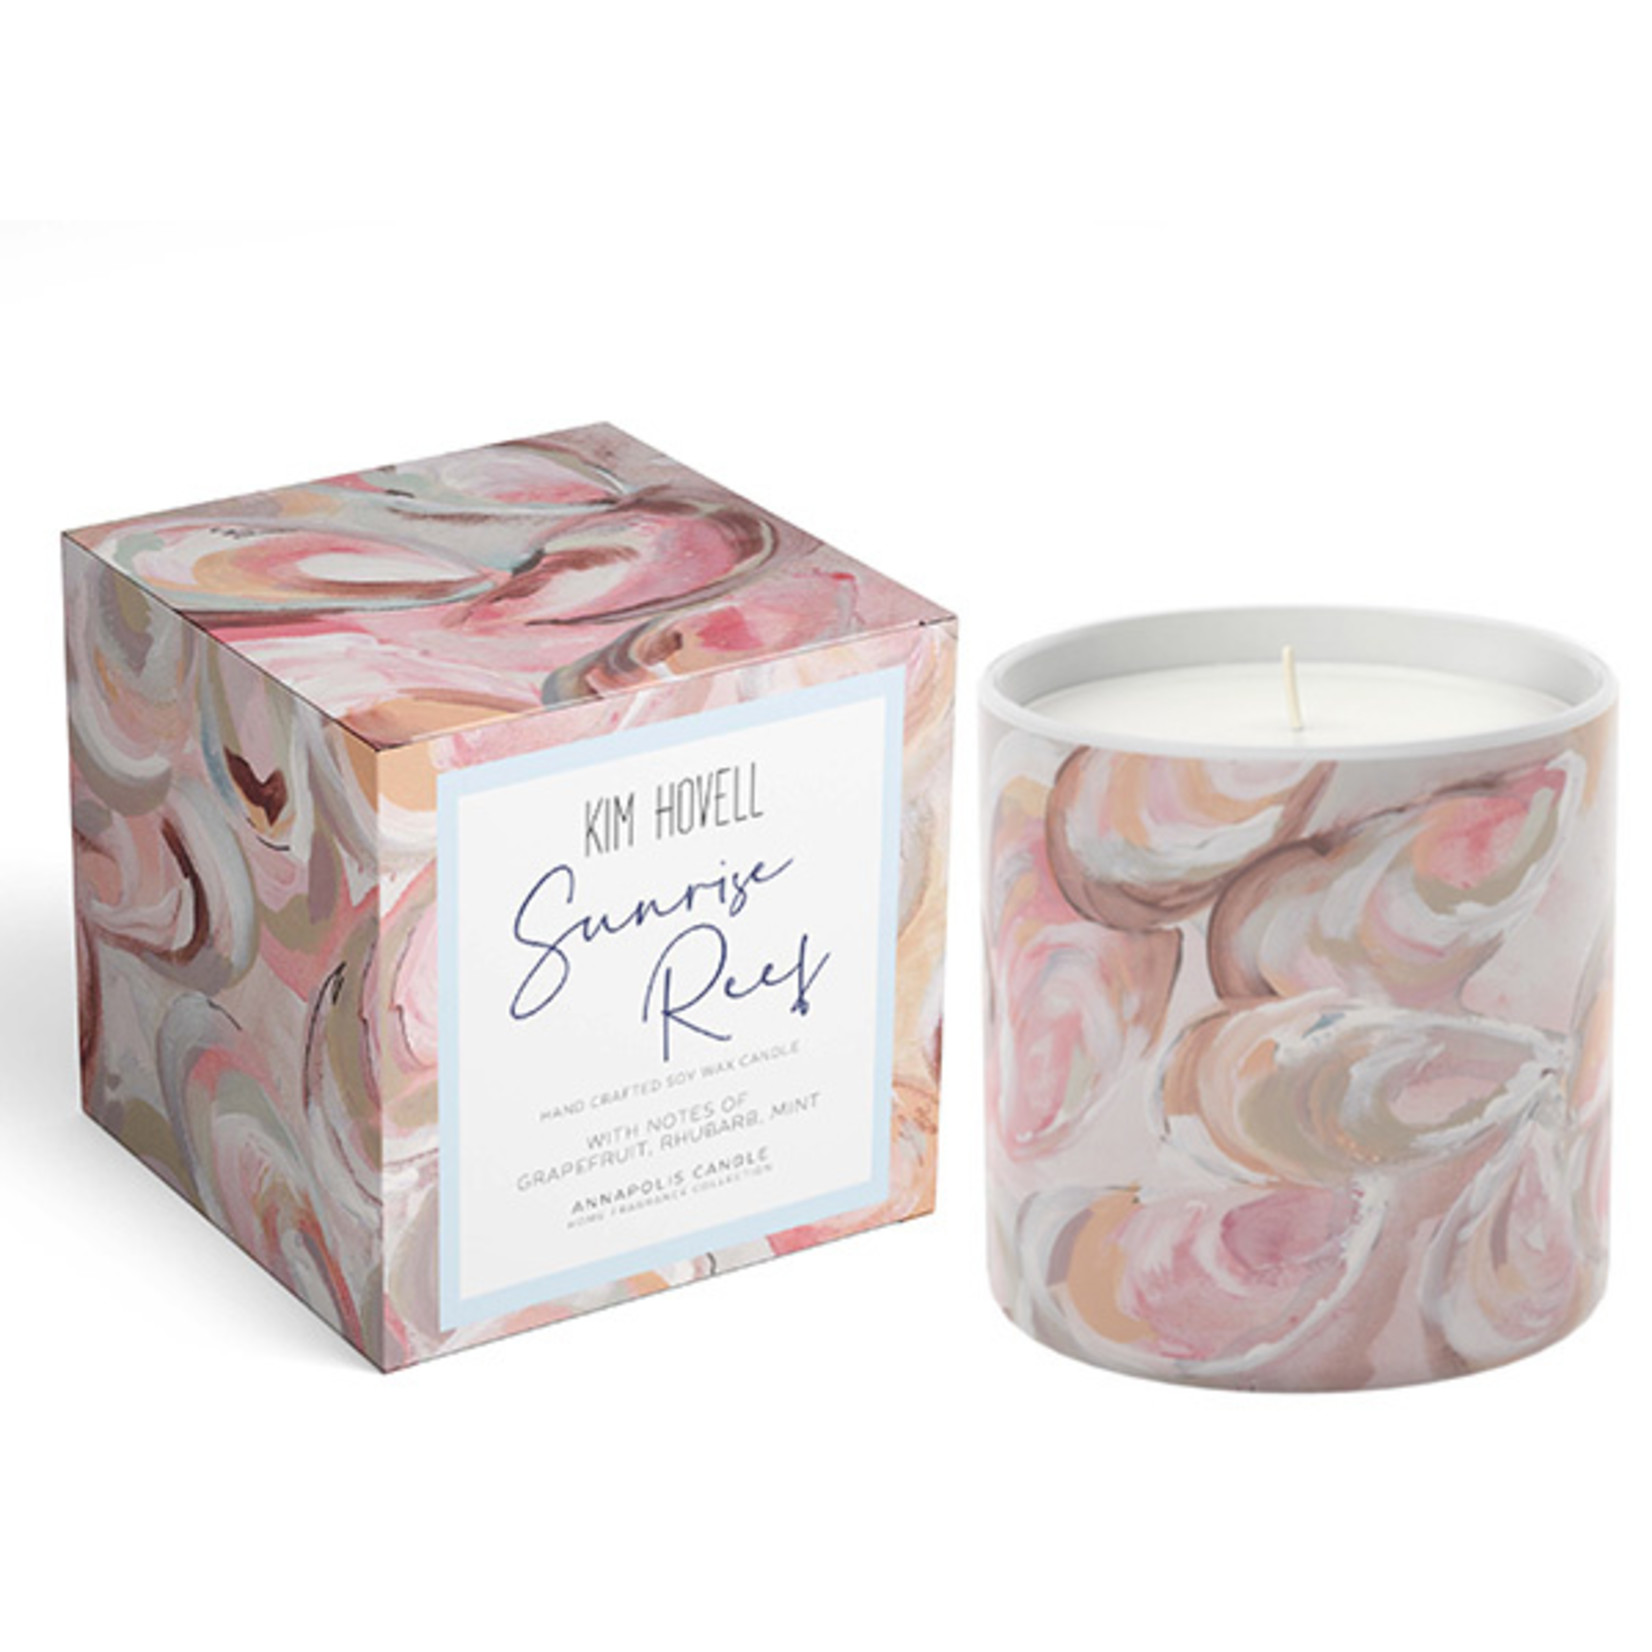 Annapolis Candle - Kim Hovell - Sunrise Reef Boxed Candle